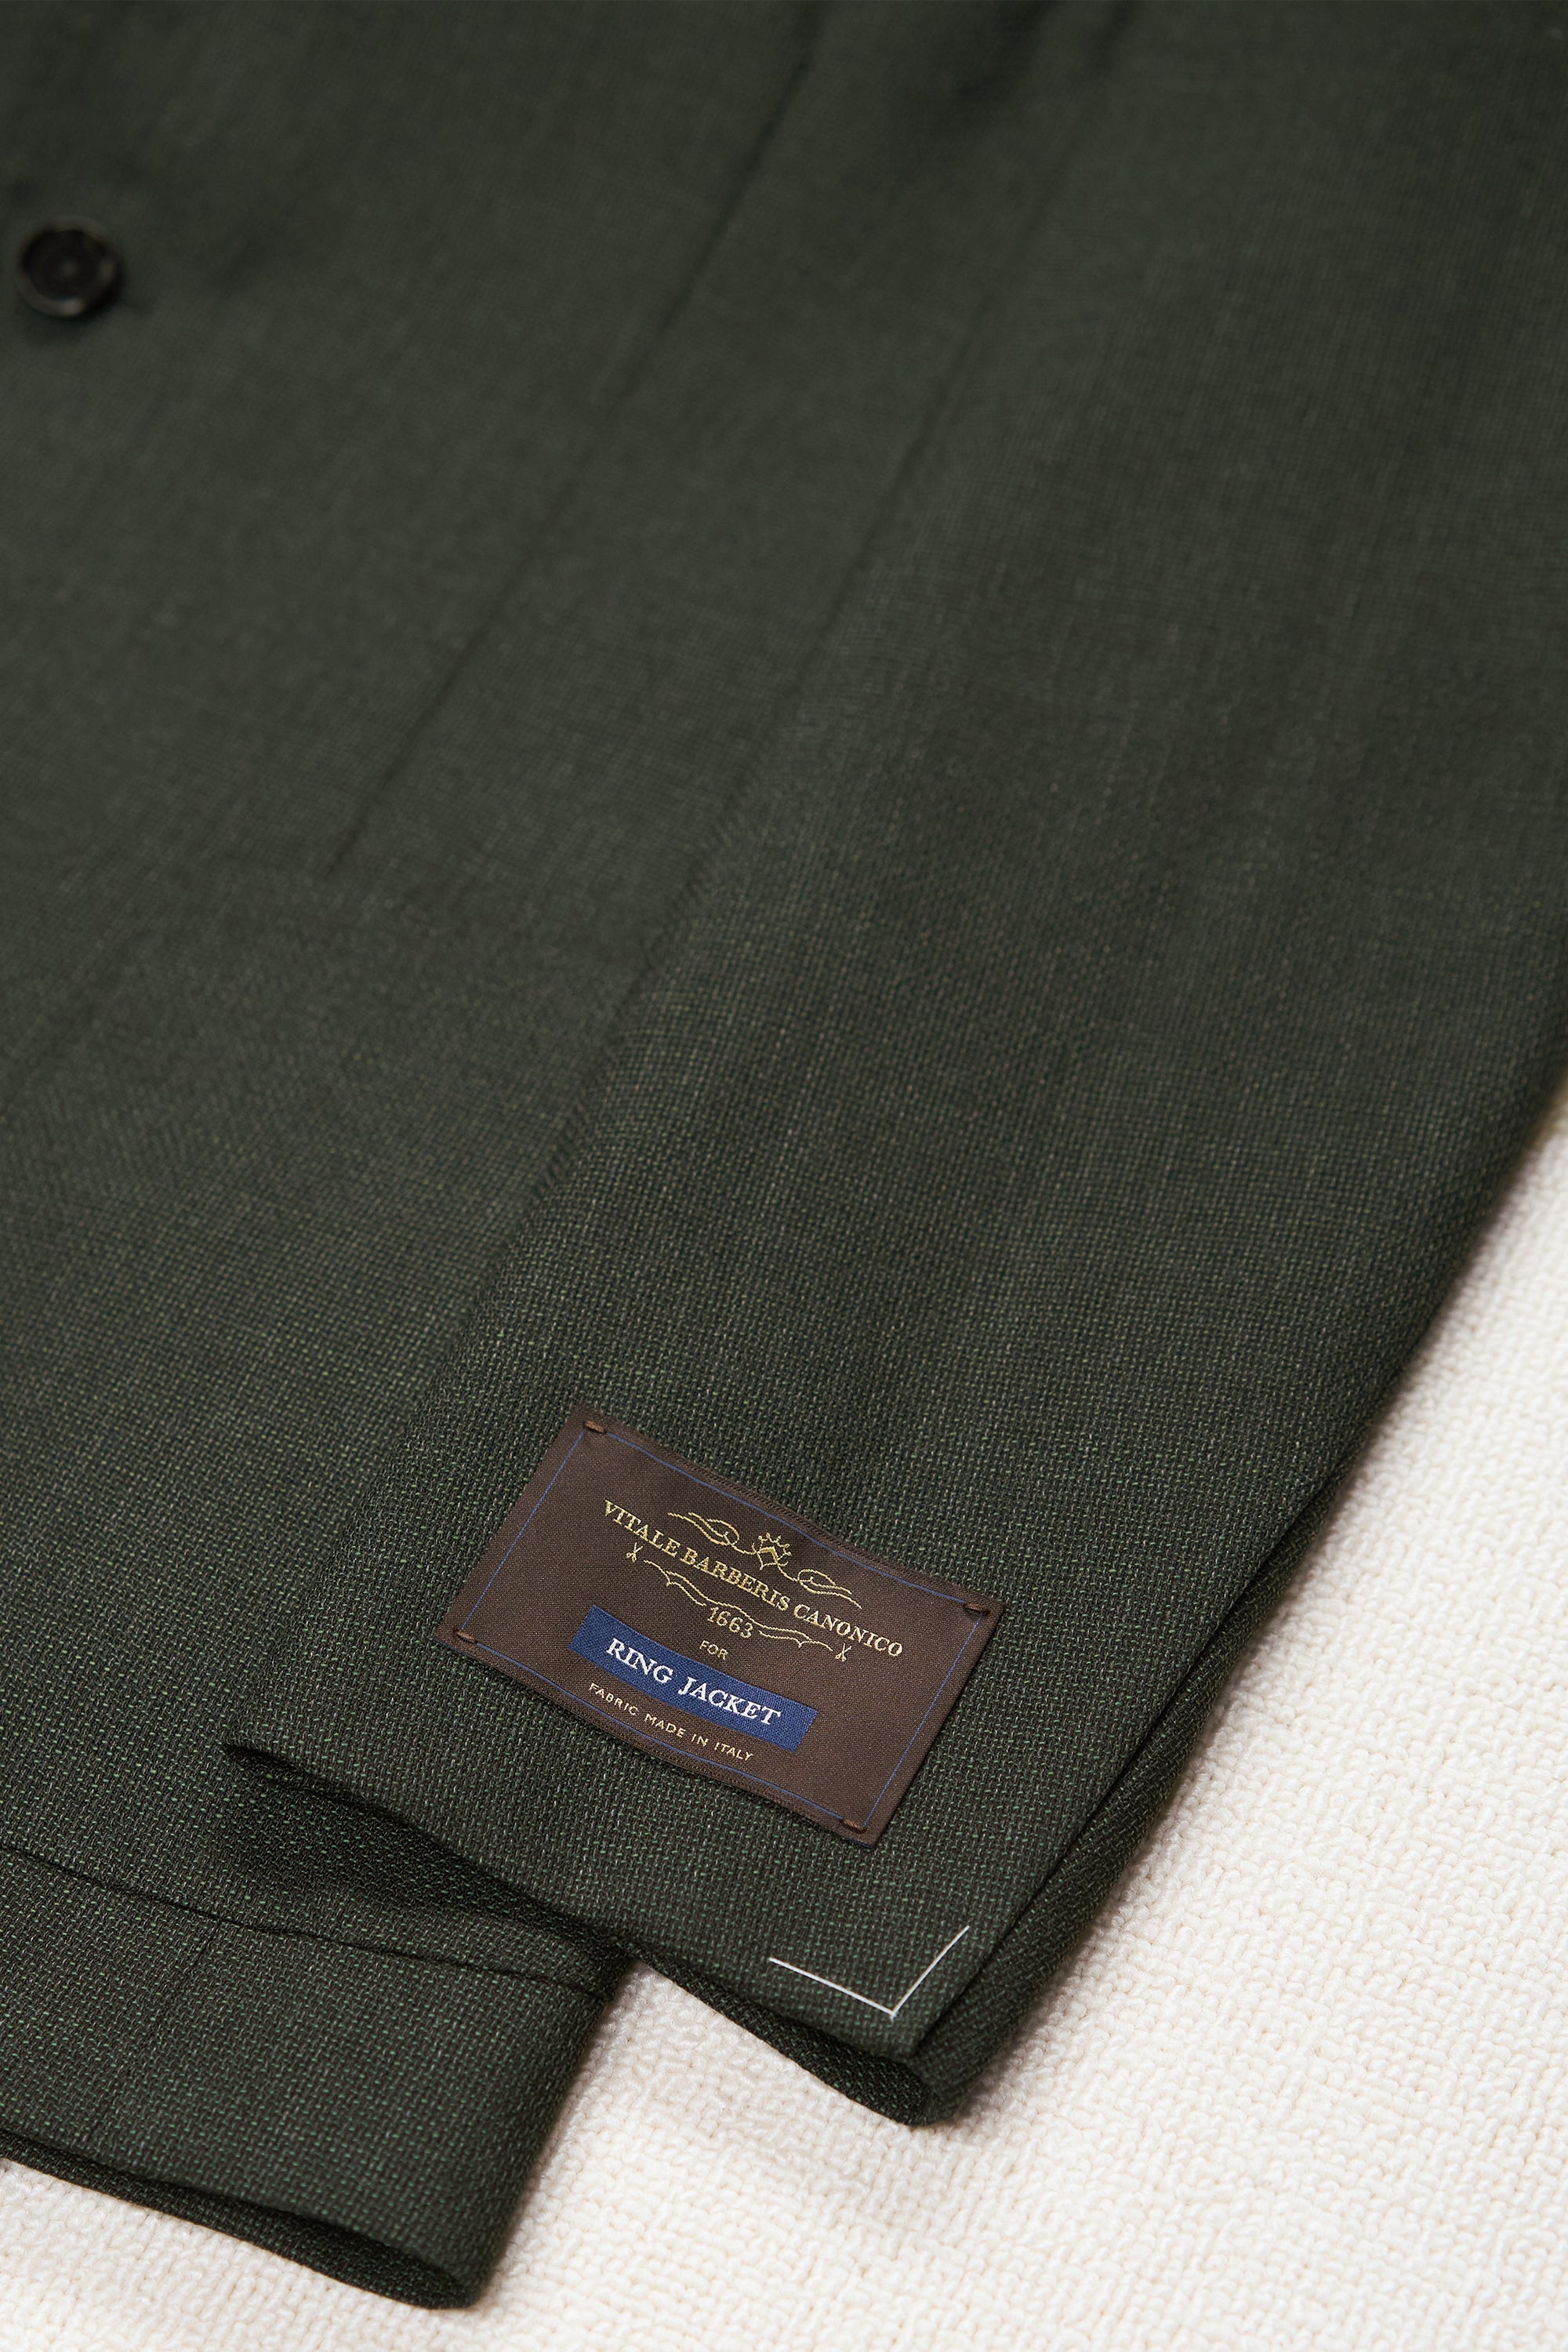 Ring Jacket 184 Forest Green Wool Sport Coat